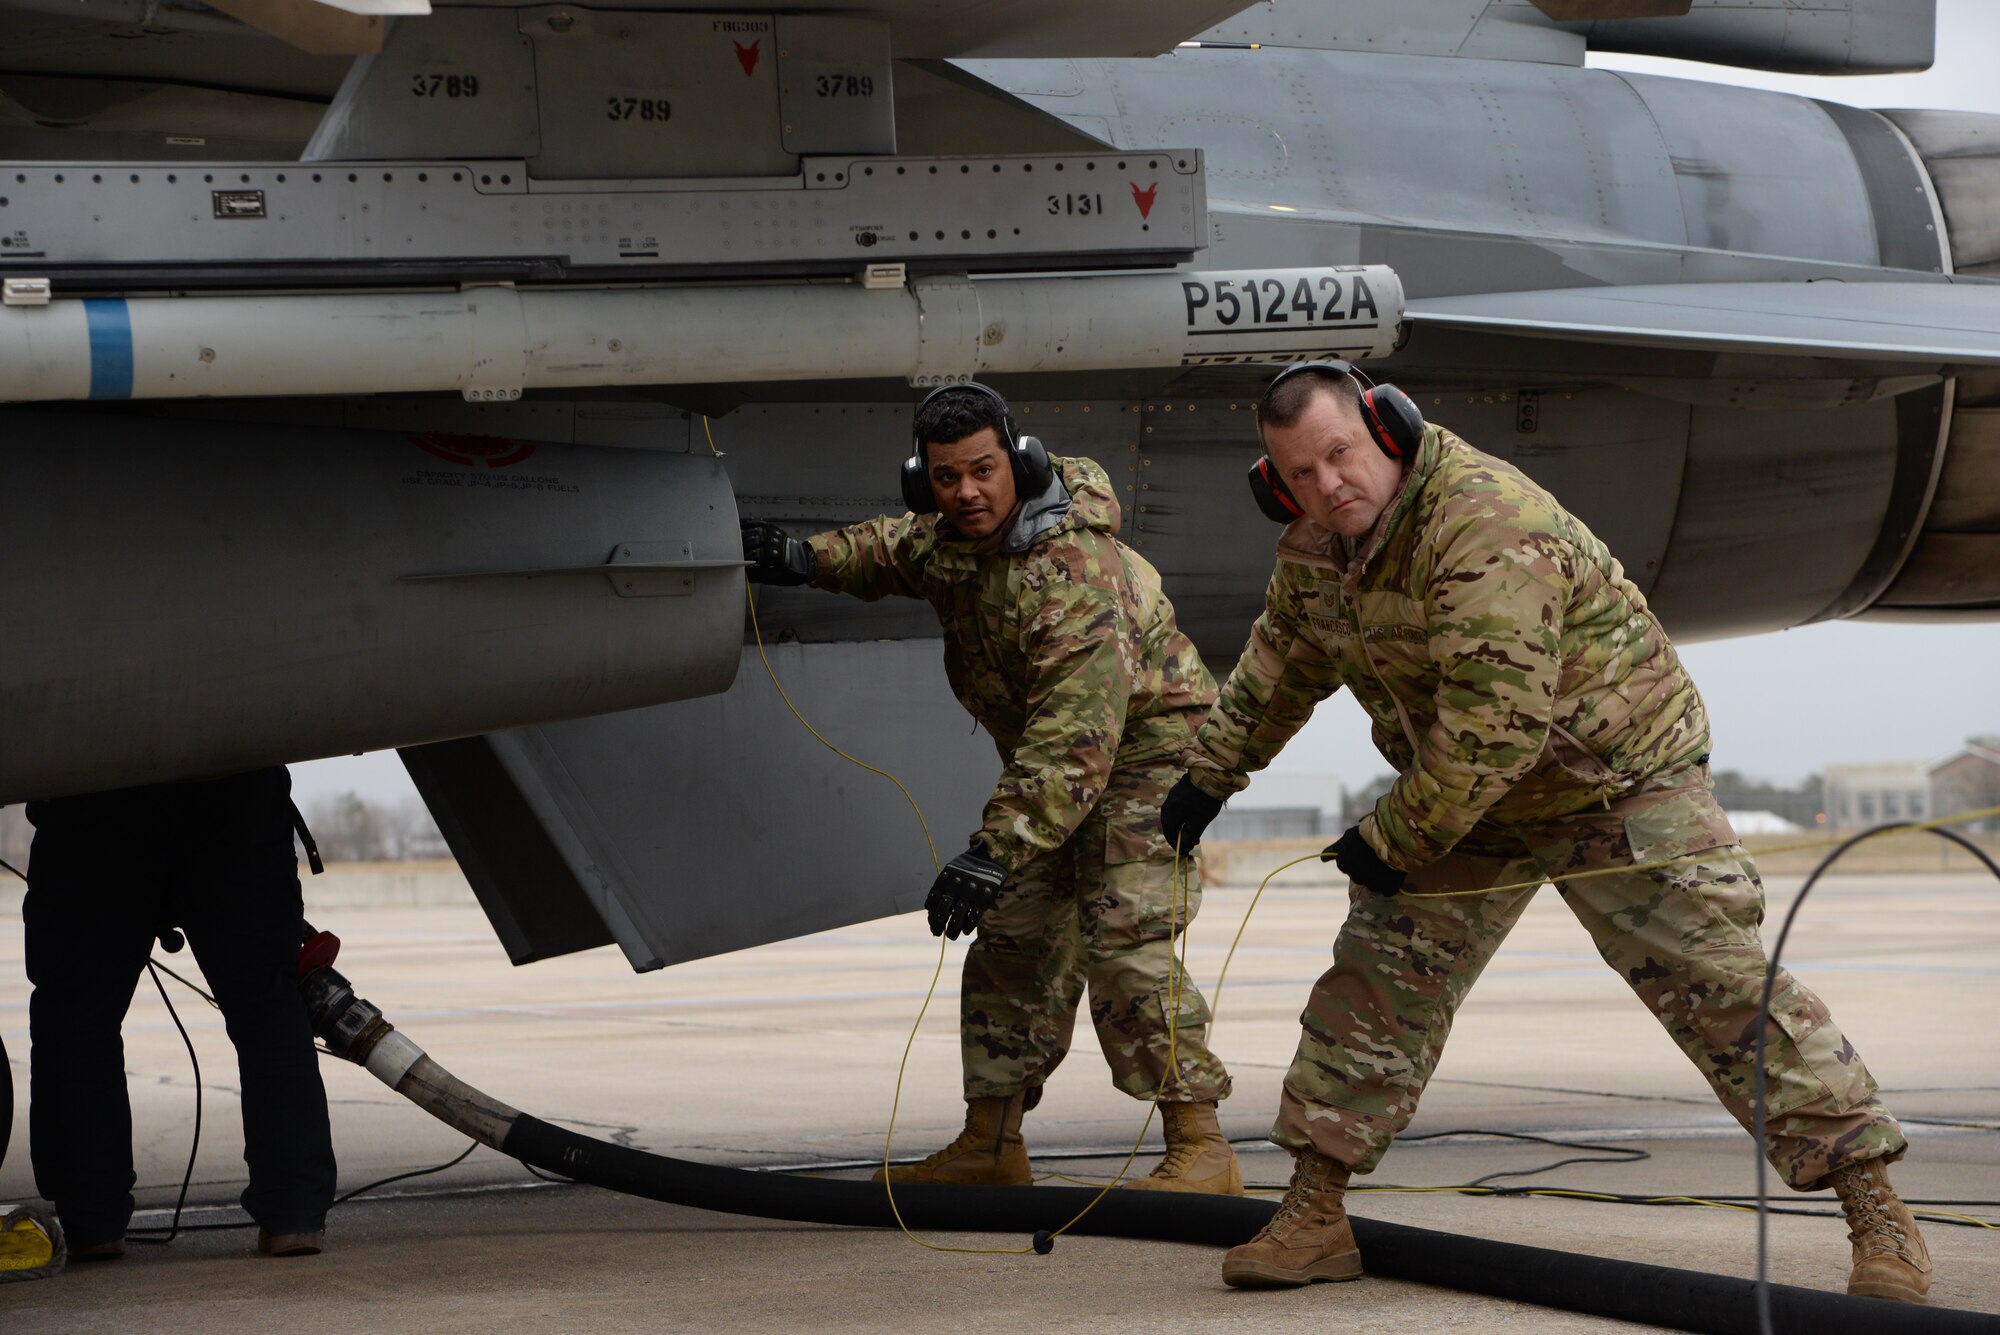 A photo of Tech. Sgt. Dominic Francesco, Sr., 177th Logistics Readiness Squadron fuels operations section chief, instructing Staff Sgt. Carmelo M. Paduani, with the 157th Civil Engineer Squadron, Pease Air National Guard Base, New Hampshire, how to perform a hot-pit refuel of an F-16C+ Fighting Falcon during an Integrated Combat Turnaround training.